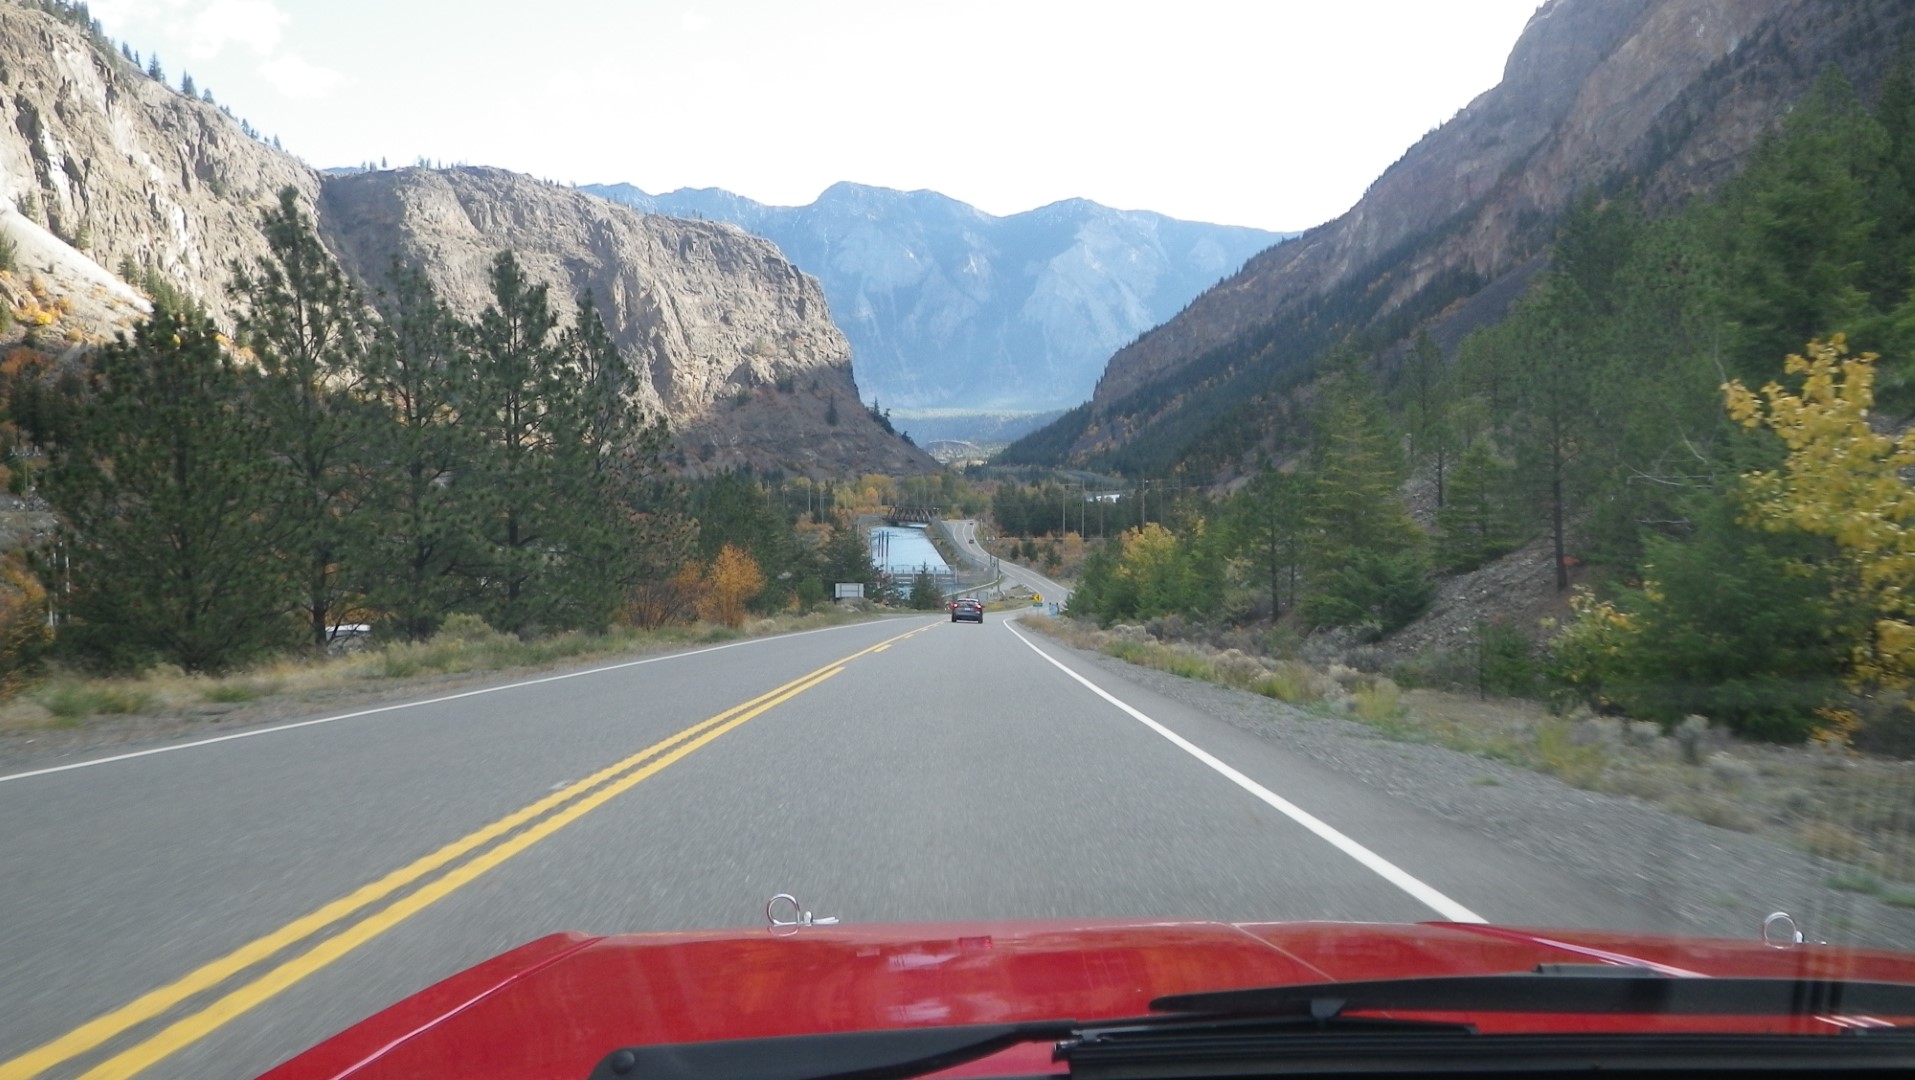 This is the northern end of the Duffy Lake road, is it drops to Lillooet